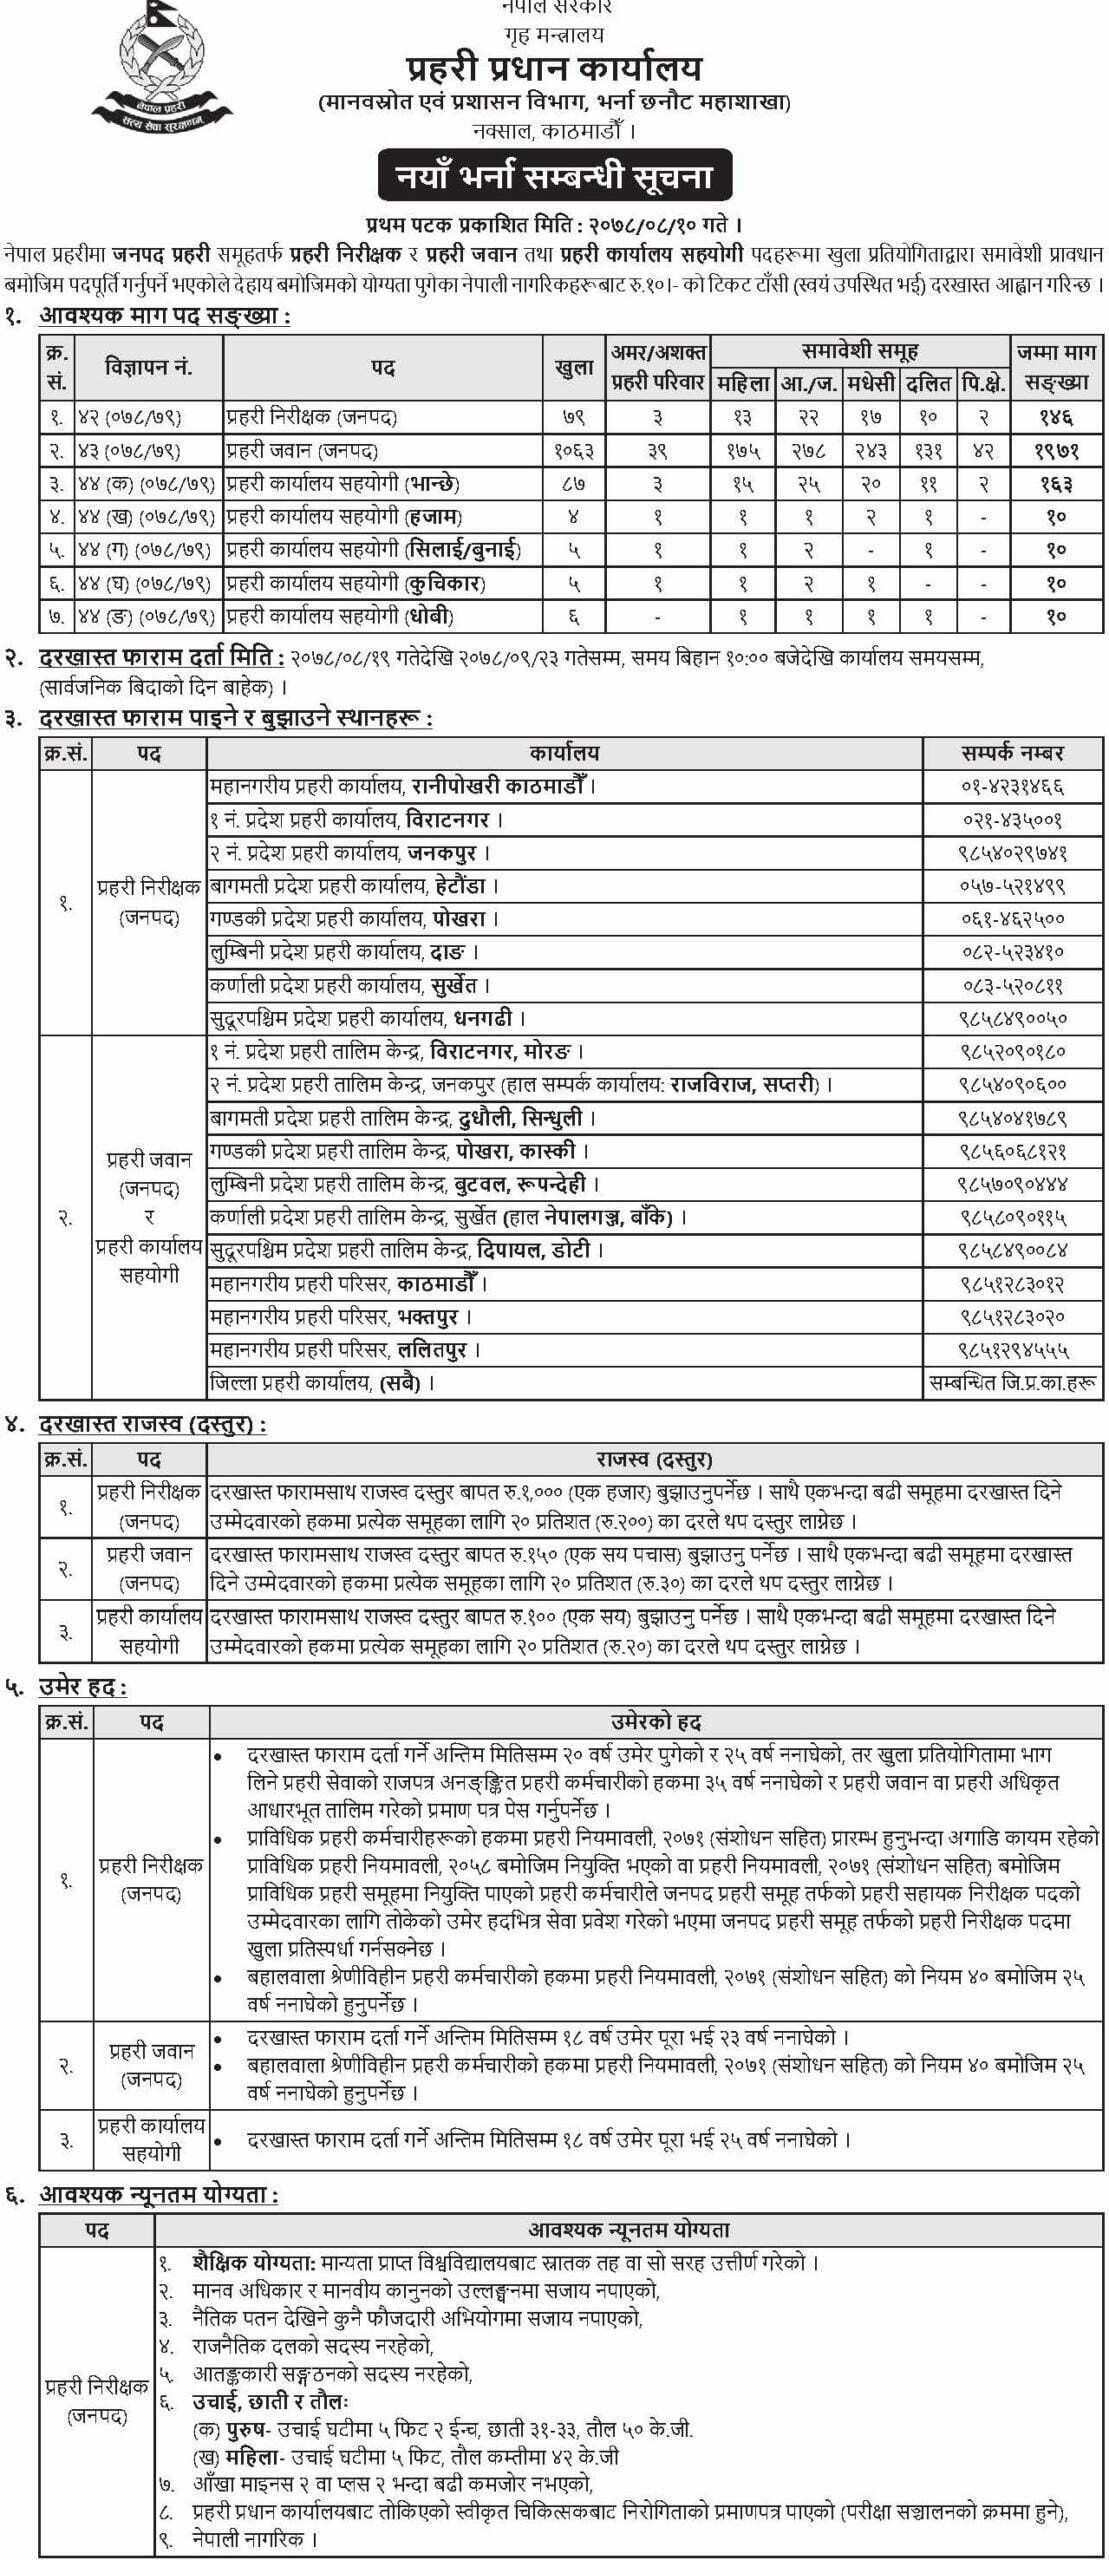 Nepal Police Vacancy | Jobs for 8 Class Passed in Nepal Police Janapad